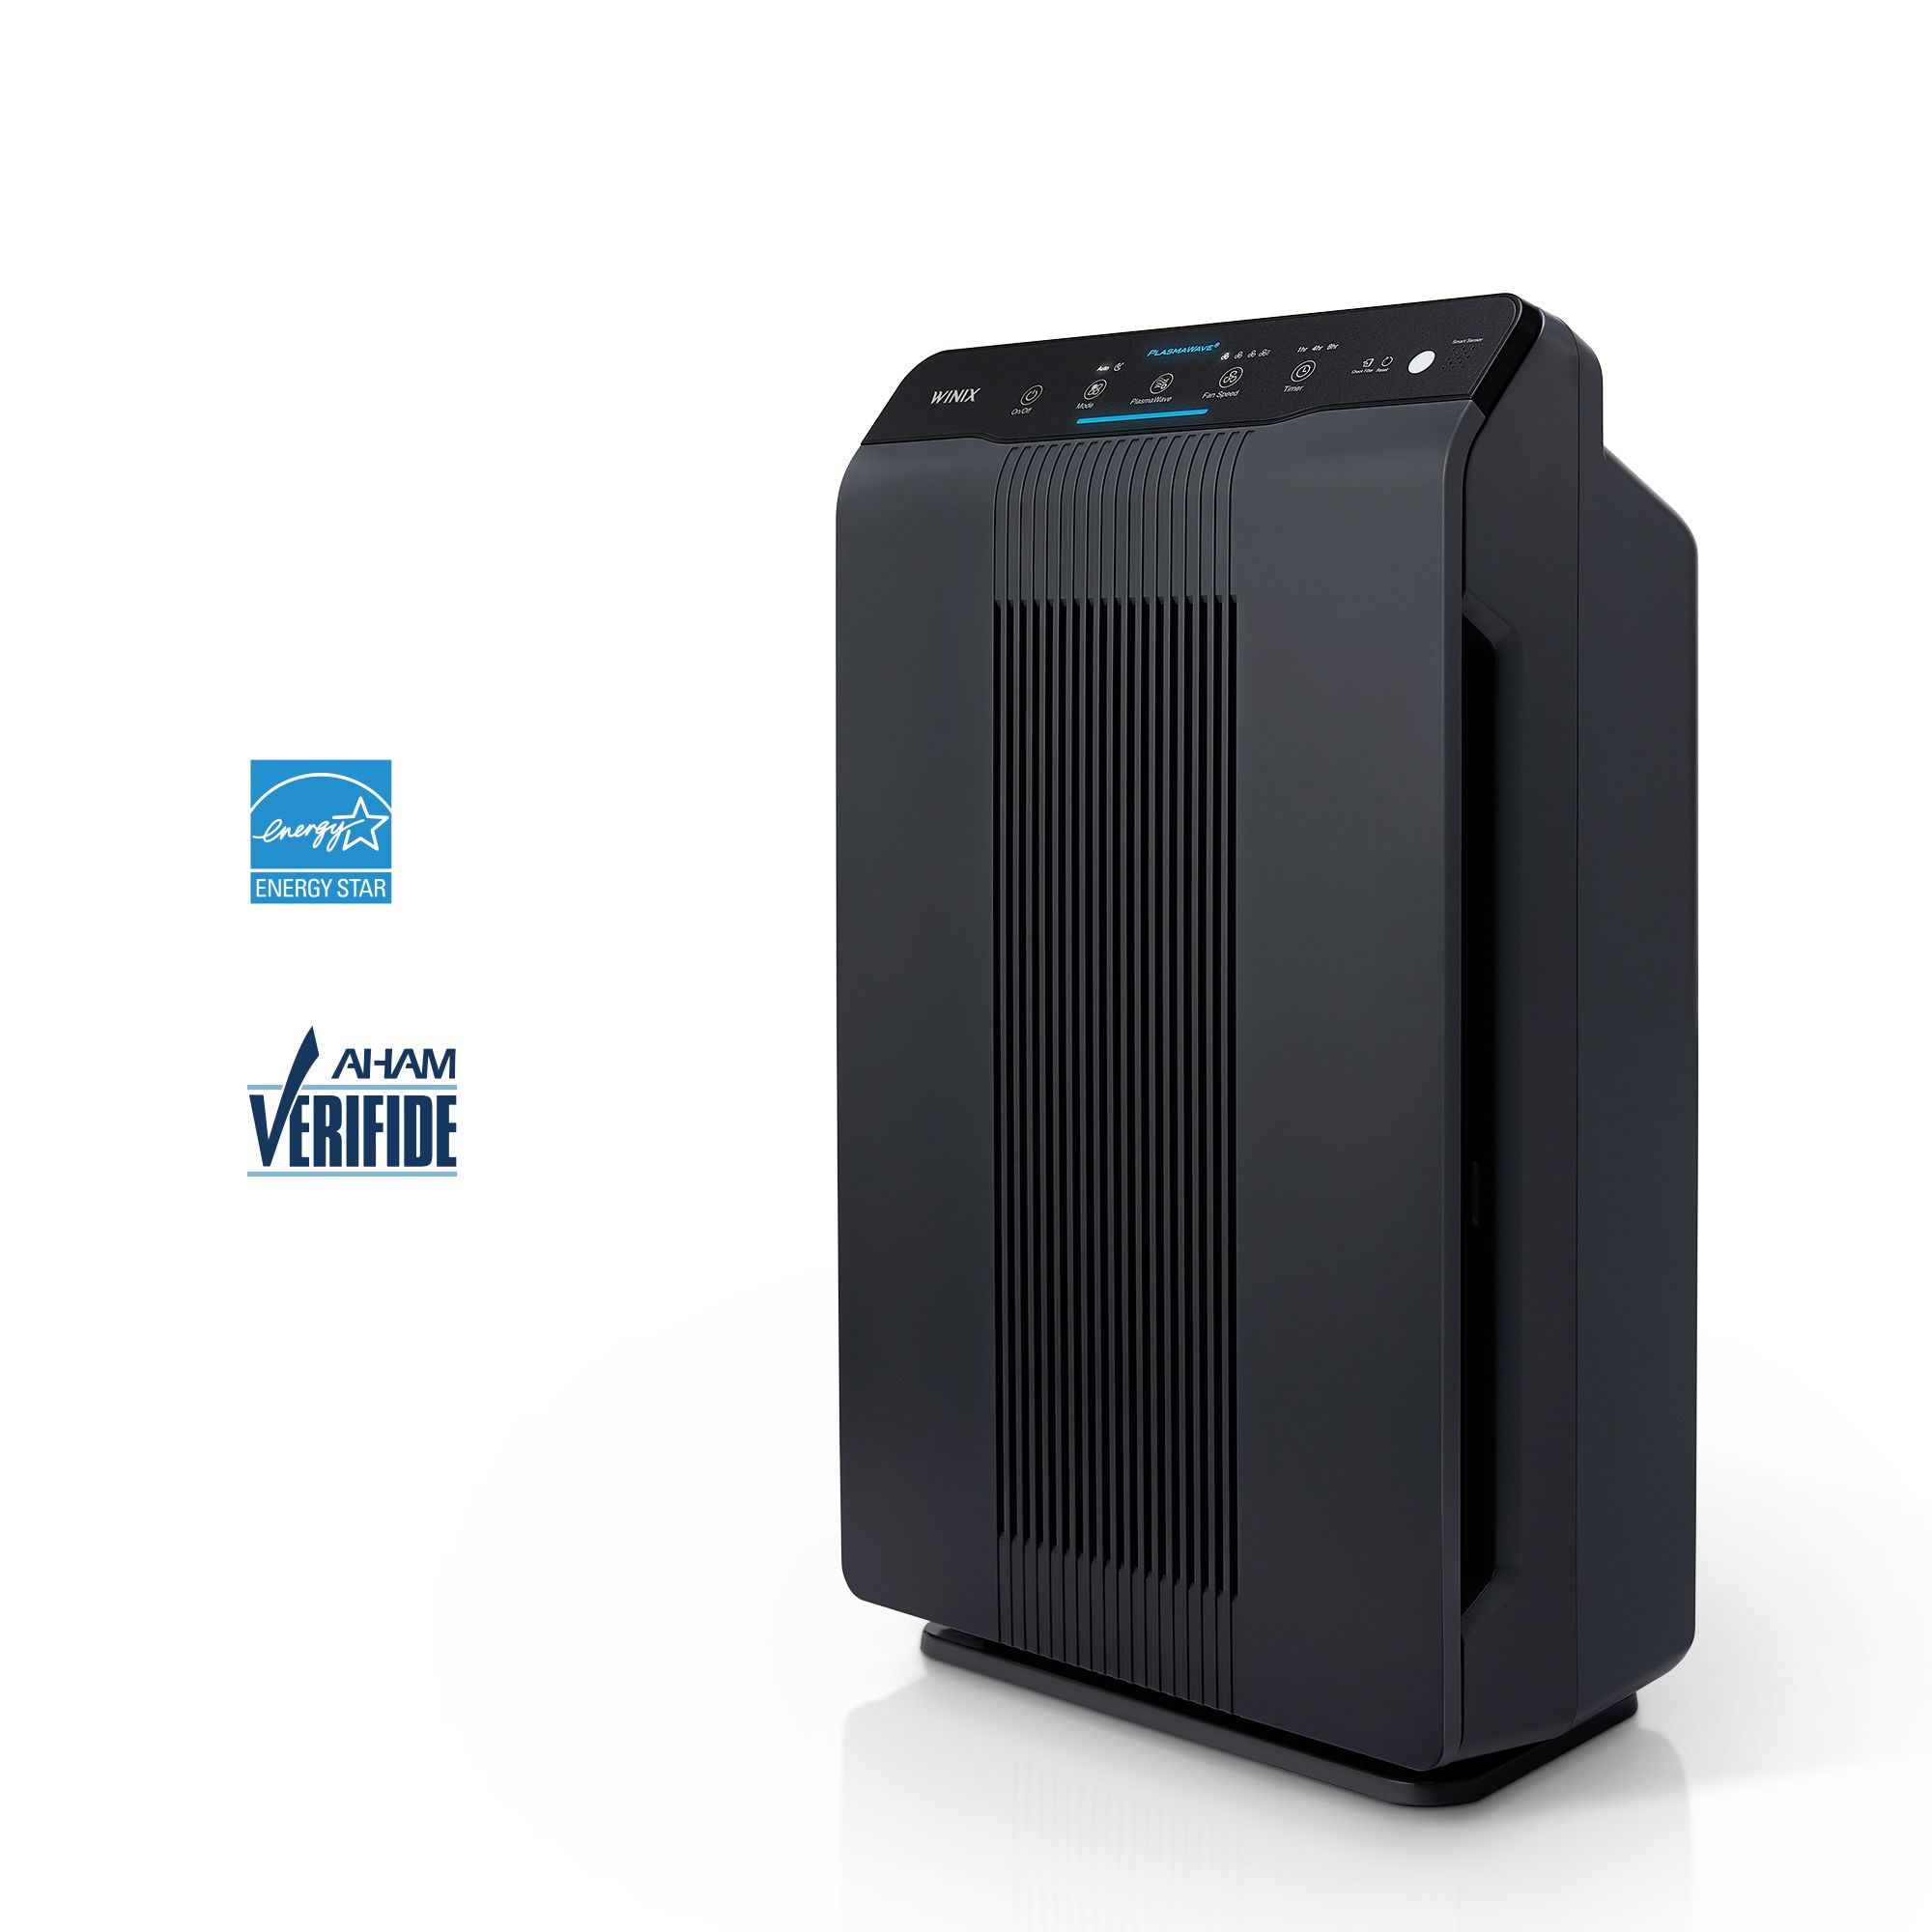 Winix 5500-2 Air Purifier with True HEPA for Particles, PlasmaWave and Odor Reducing Washable AOC Carbon Filter. AHAM Verified for 360 sq ft, Max Room Capacity of 1728 sq ft - image 5 of 7